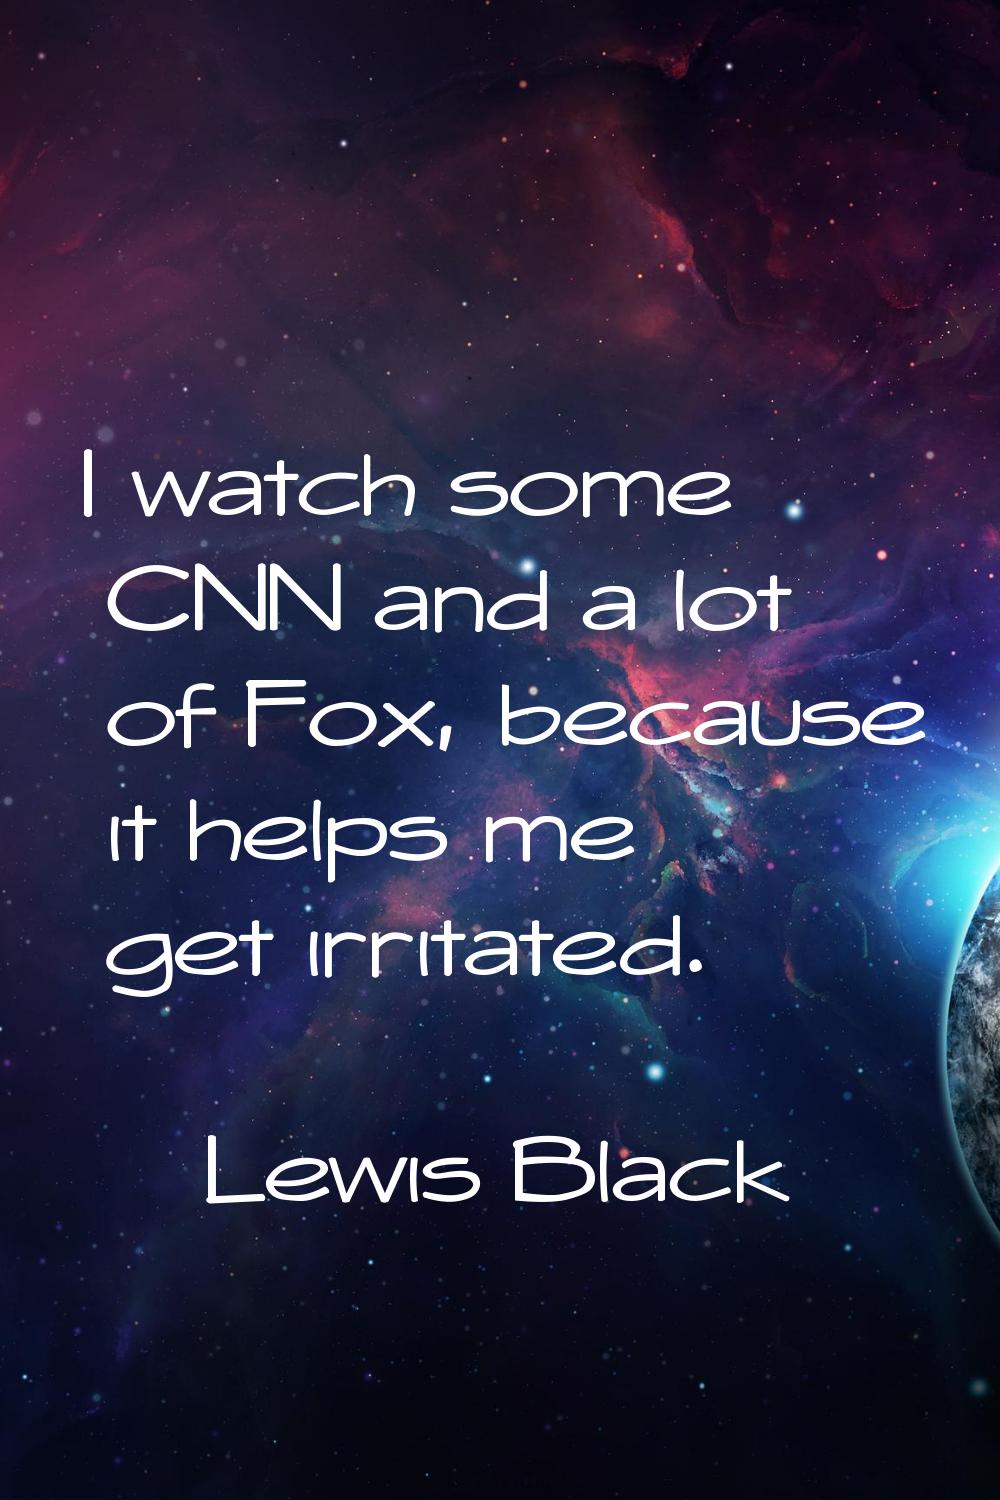 I watch some CNN and a lot of Fox, because it helps me get irritated.